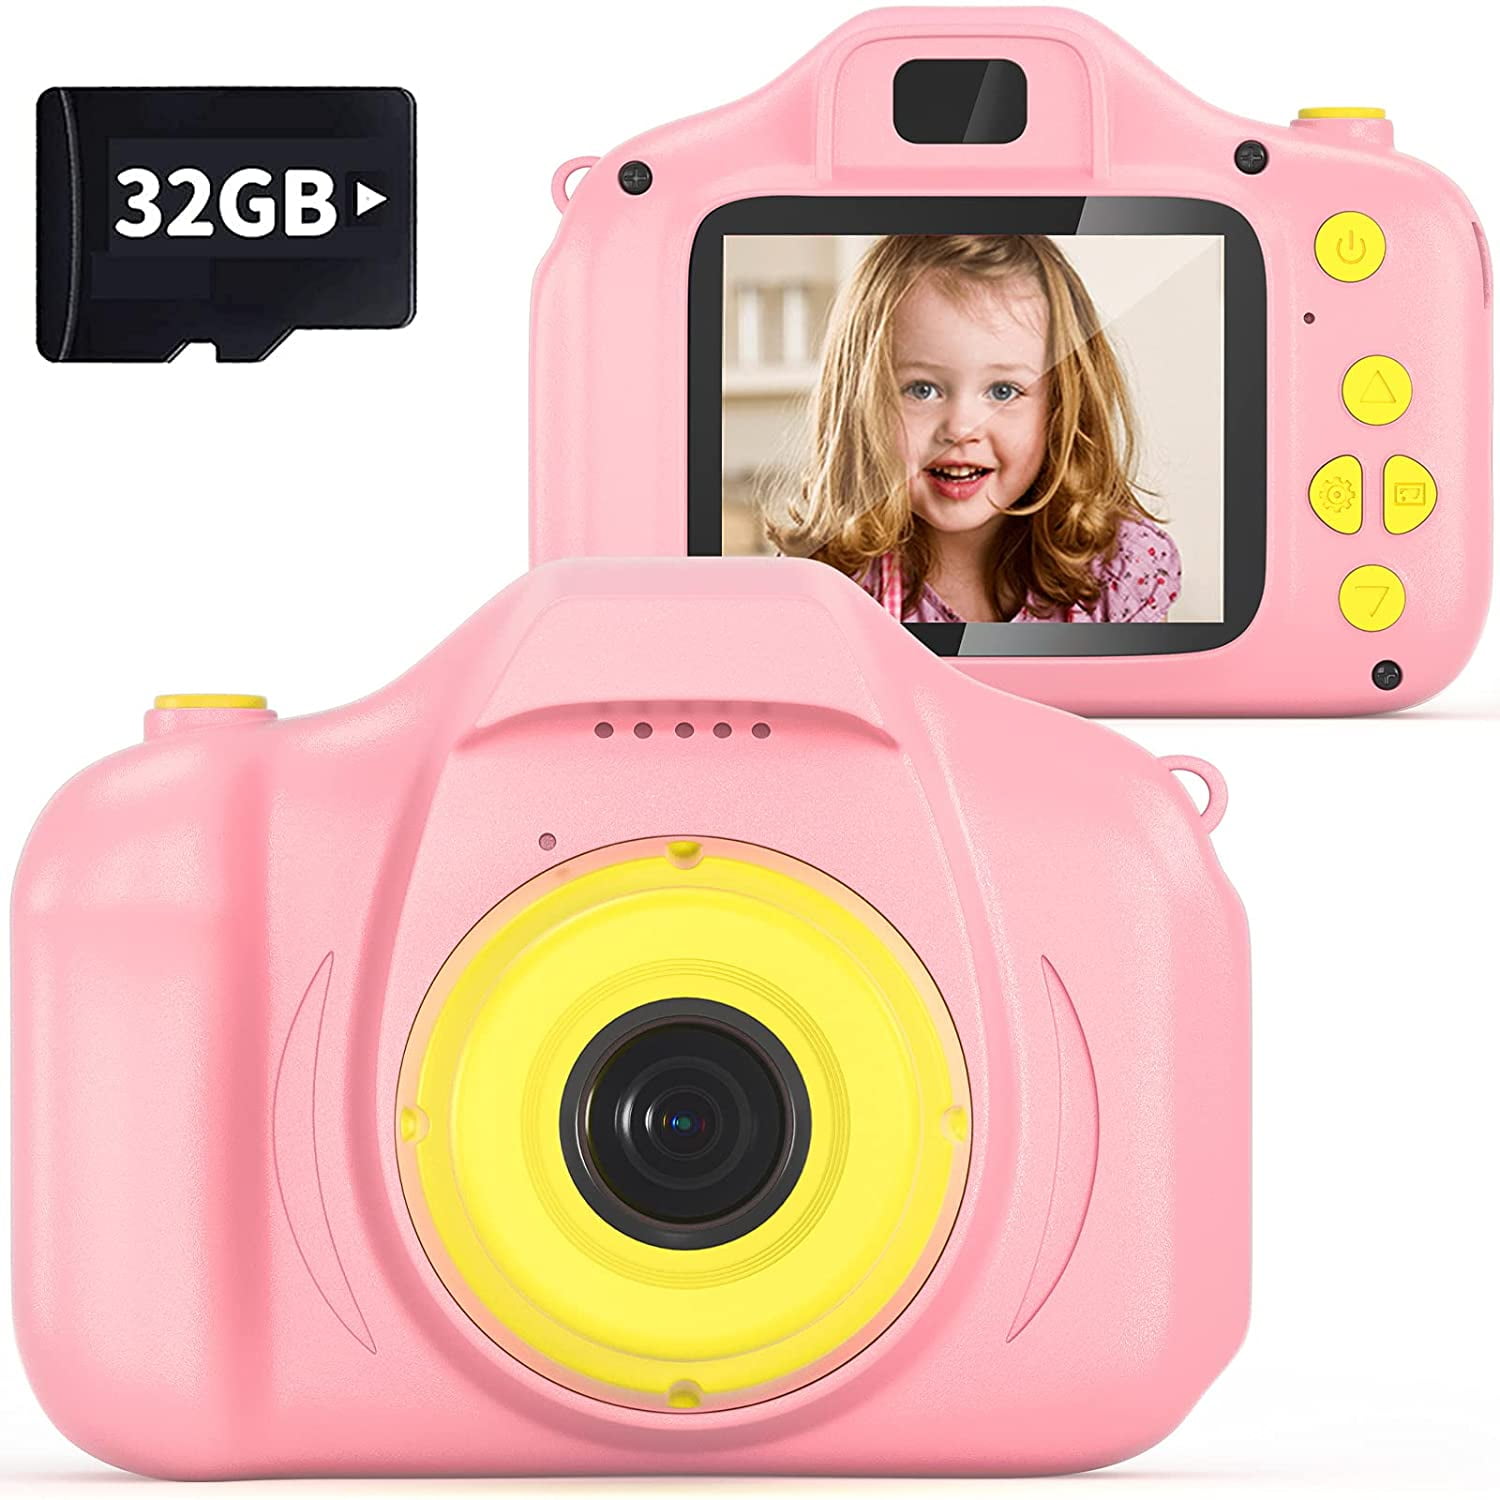 Details about   Children Mini Digital Cameras Toy 2inch Video Camcorder Birthday Christmas Gifts 